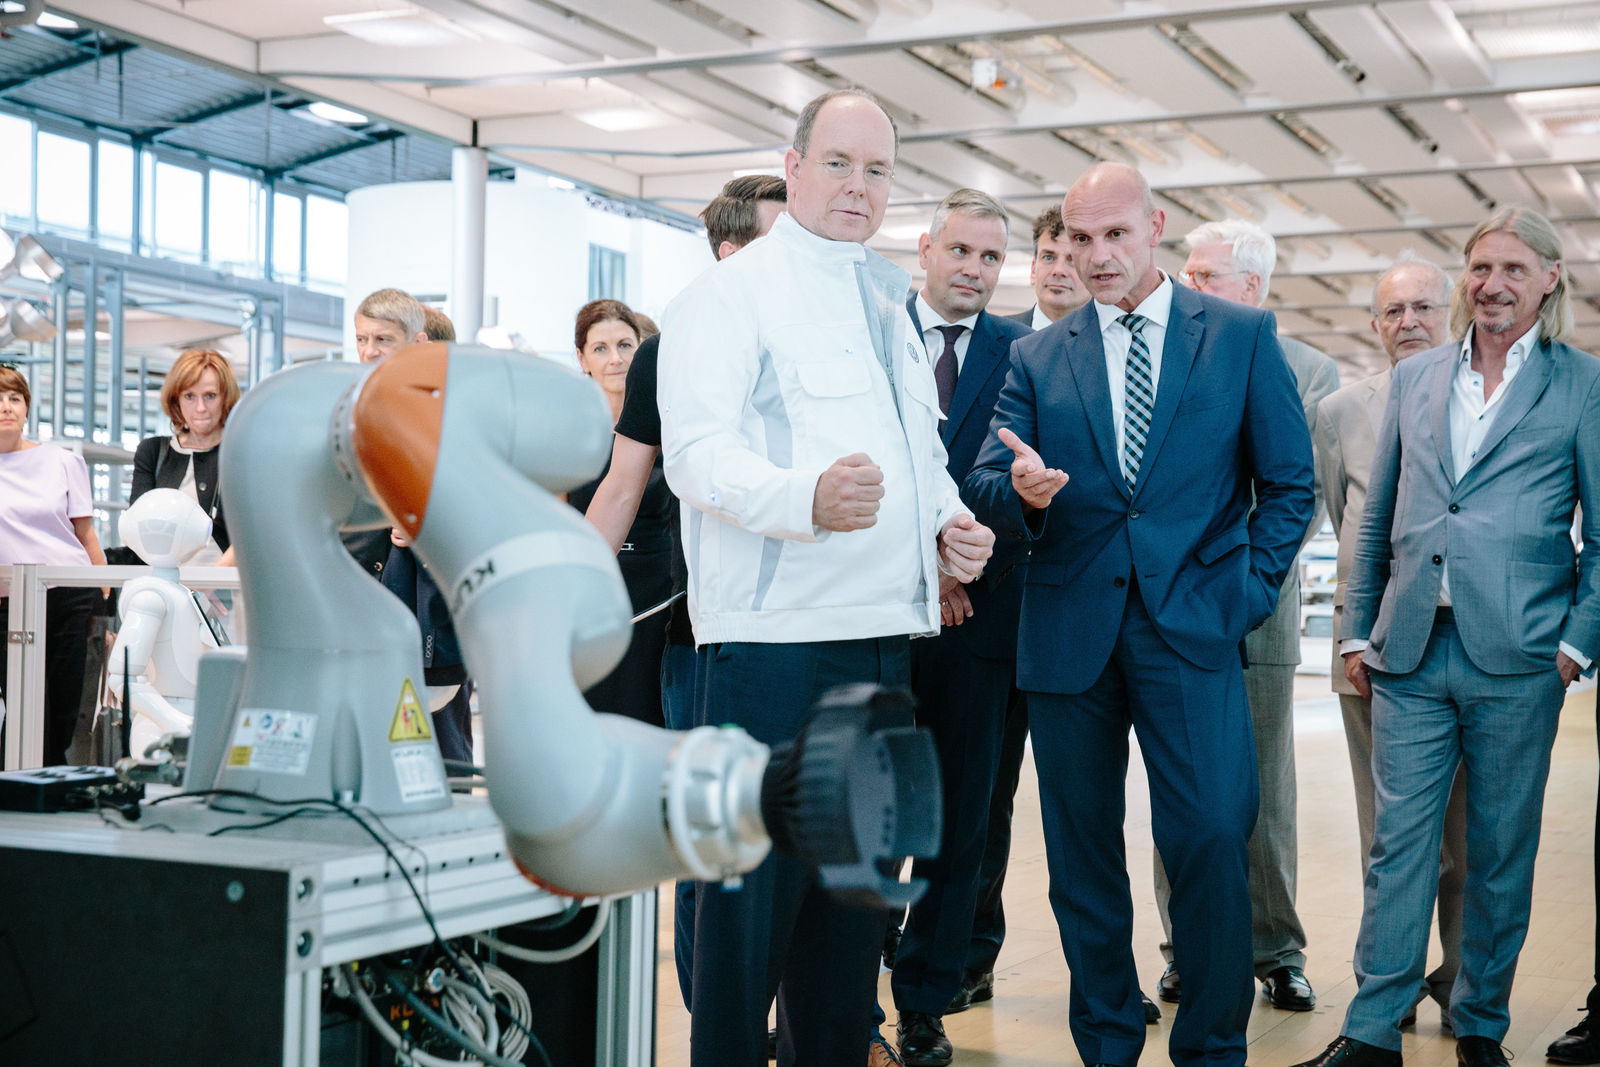 Prince Albert II of Monaco finds out more about e-mobility at the Gläserne Manufaktur